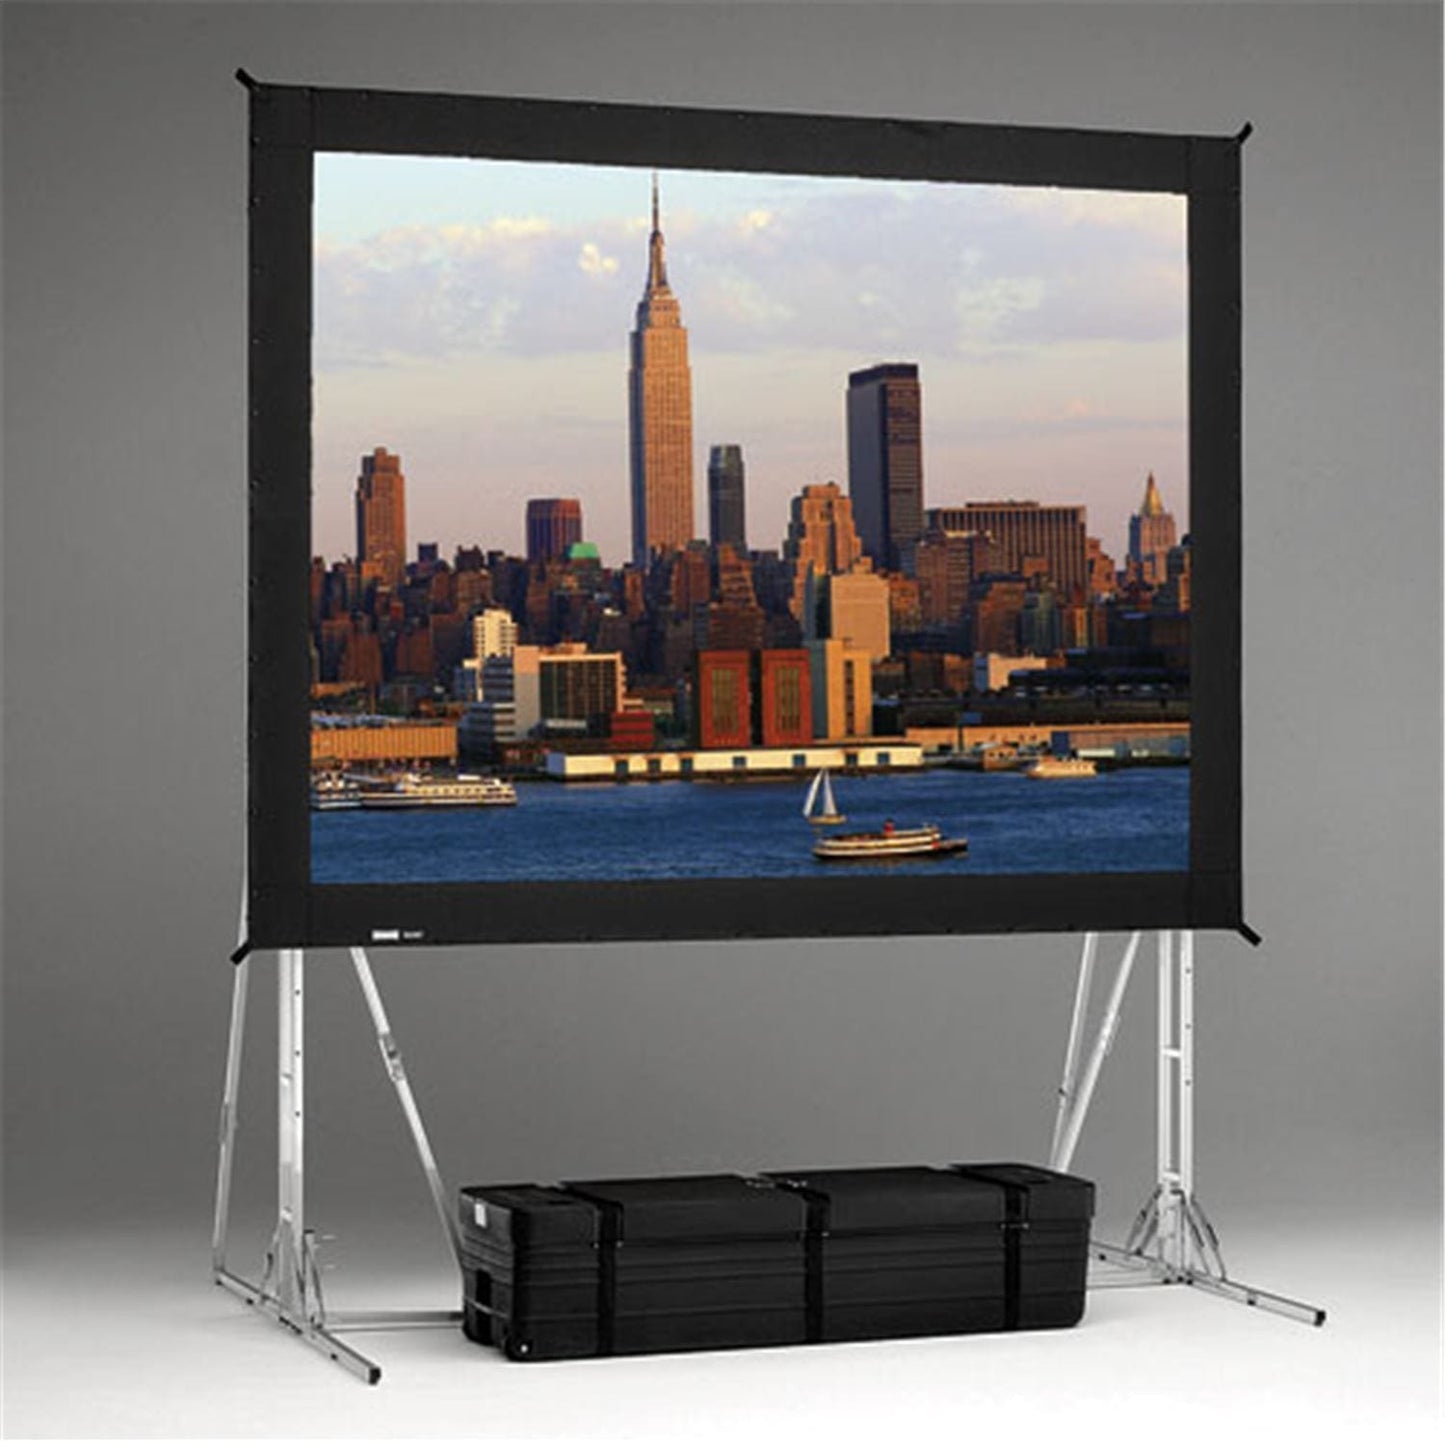 Da-Lite 40529 19 Ft x 25 Ft Fast-Fold Truss Projection Screen - ProSound and Stage Lighting